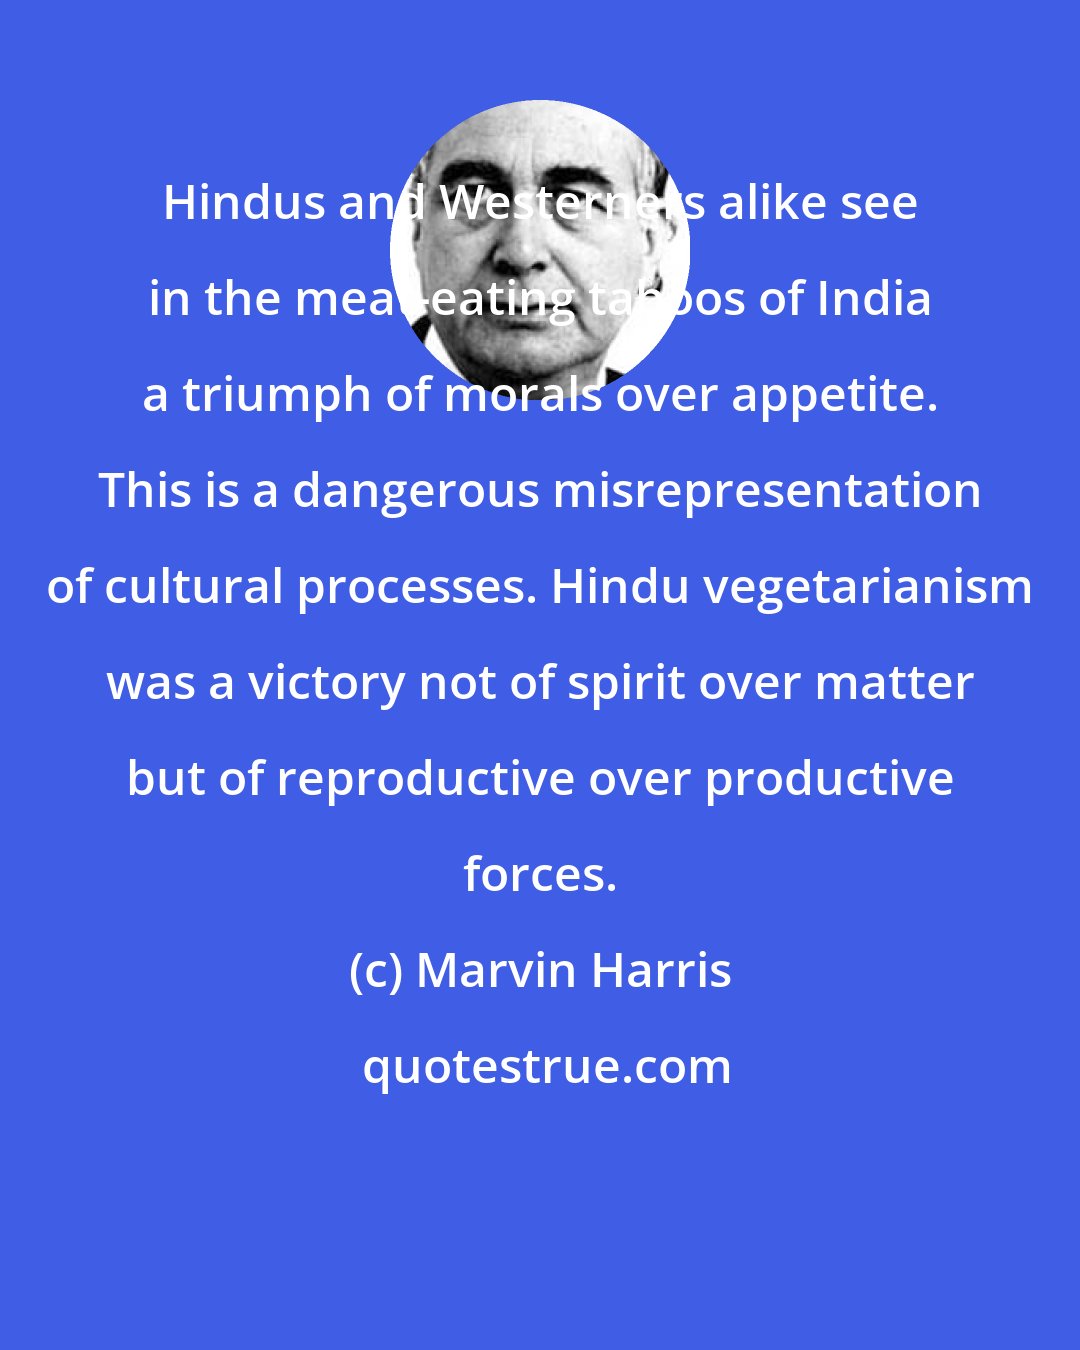 Marvin Harris: Hindus and Westerners alike see in the meat-eating taboos of India a triumph of morals over appetite. This is a dangerous misrepresentation of cultural processes. Hindu vegetarianism was a victory not of spirit over matter but of reproductive over productive forces.